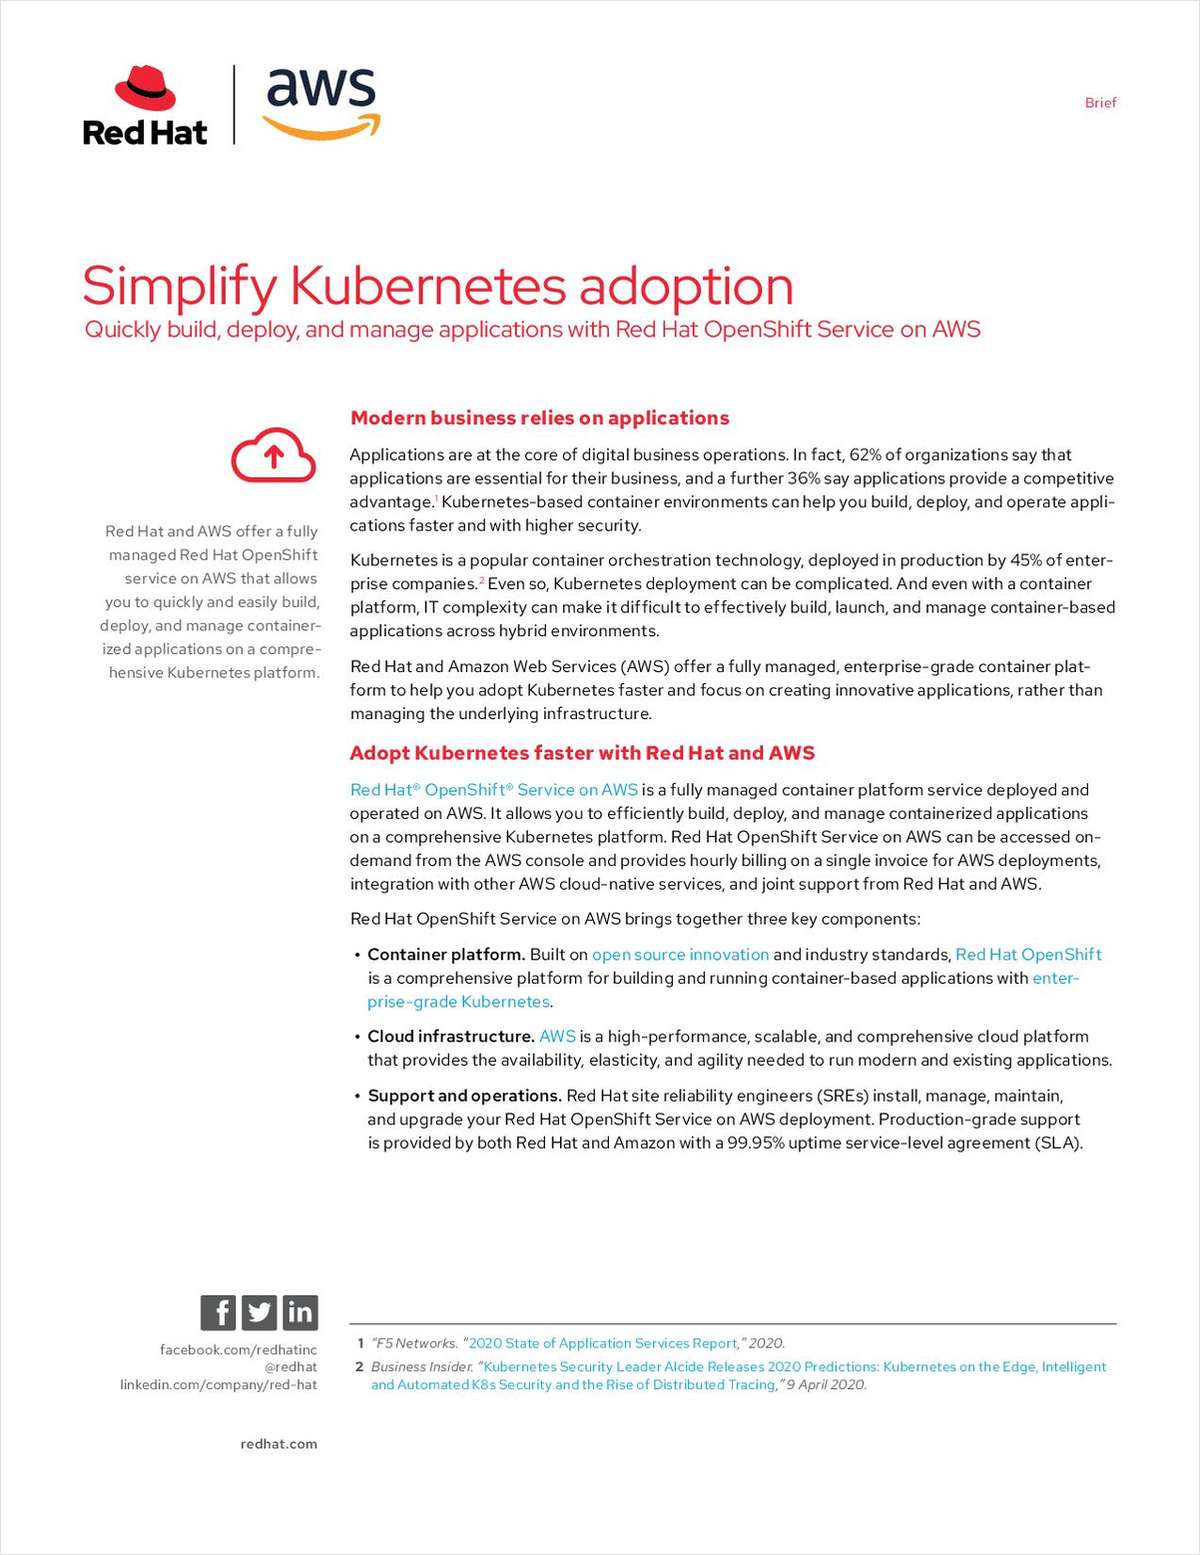 Simplified Guide to Deploying Kubernetes